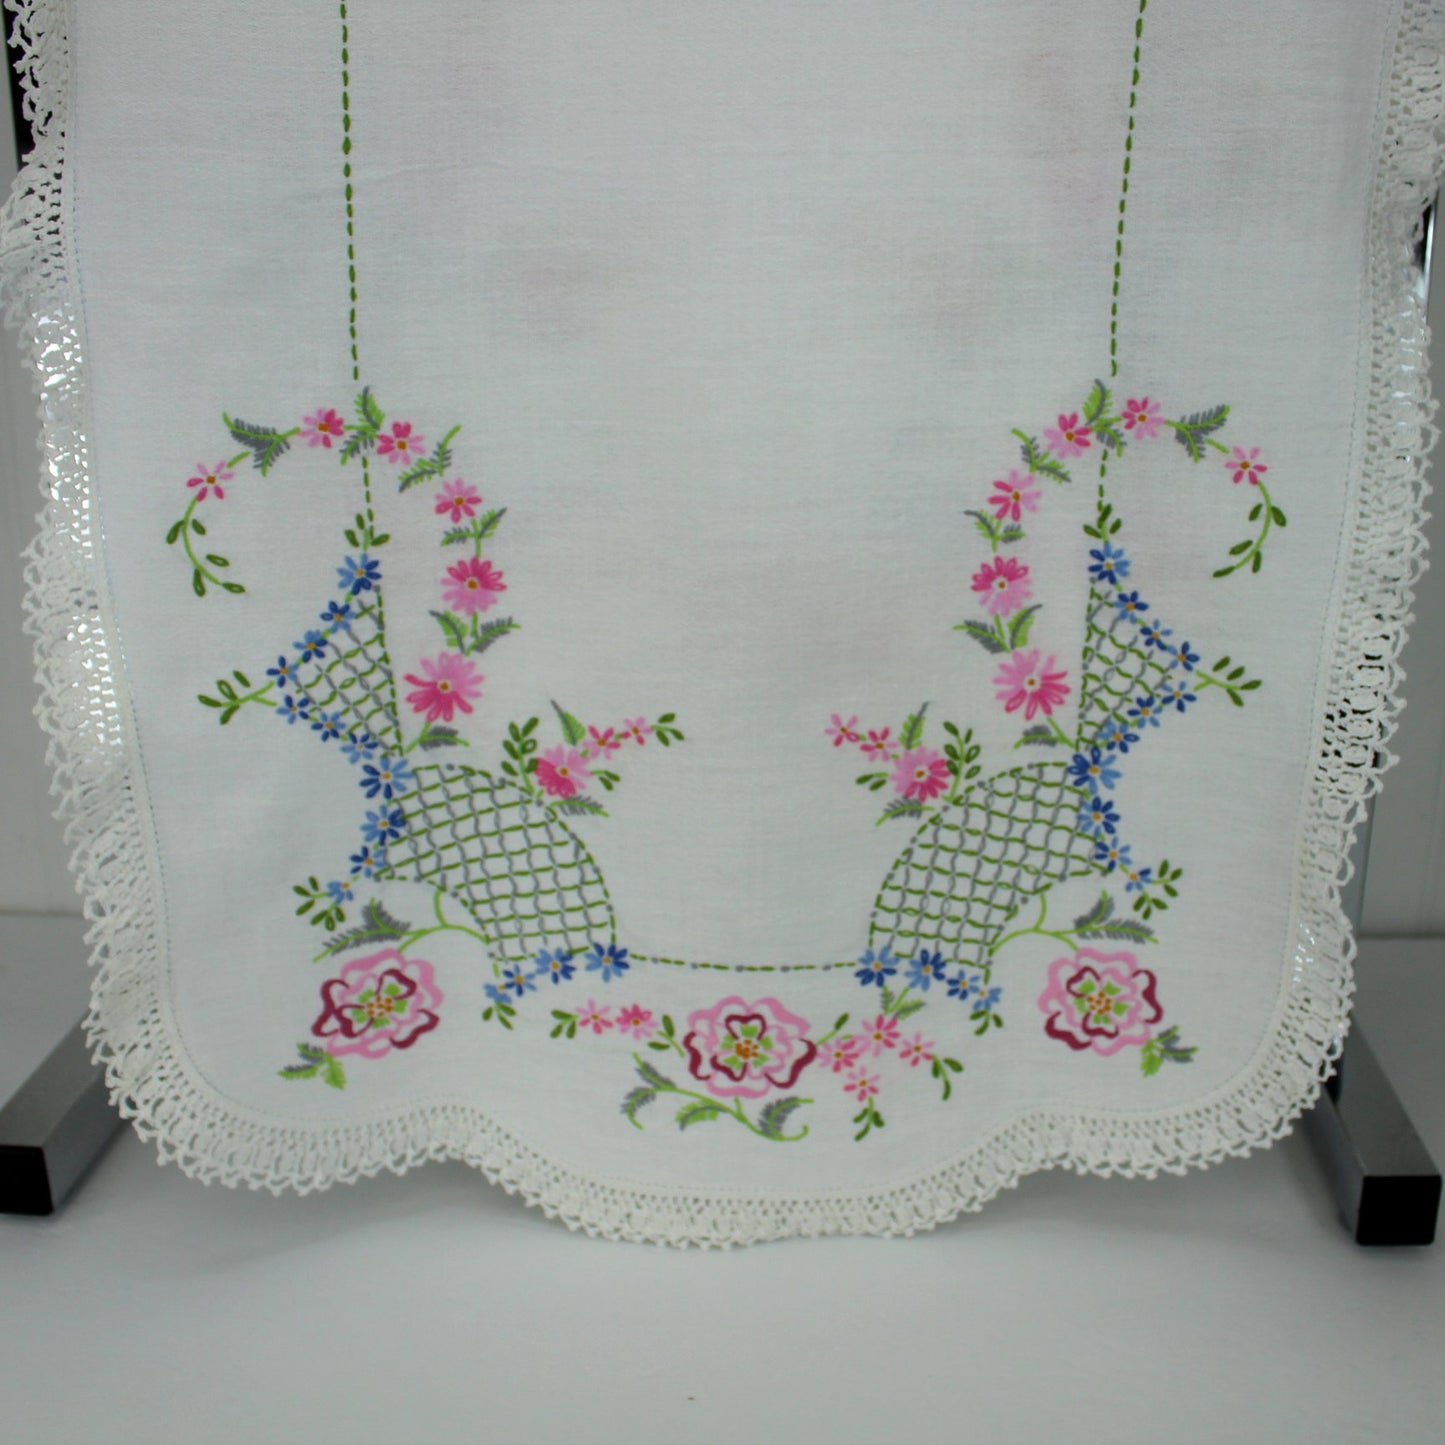 Lace Embroidery Table Runner Shawl White Heavy Cotton Pastel Hand Work design each end of item